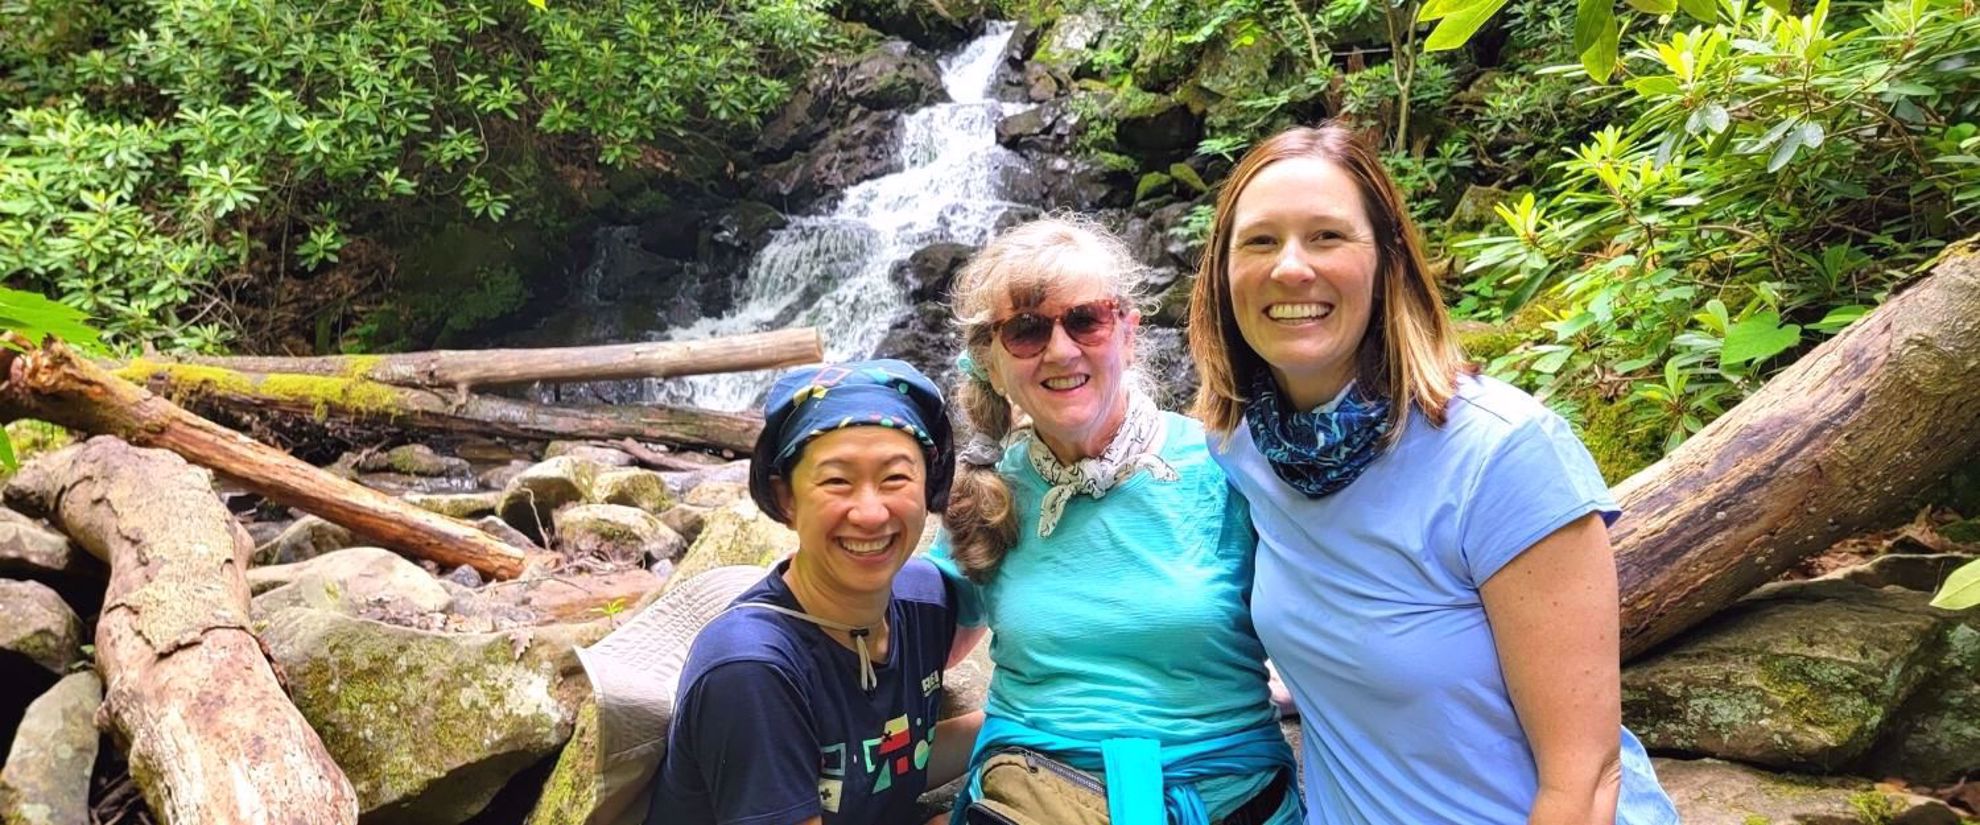 learn to backpack with the support of female guides and friends